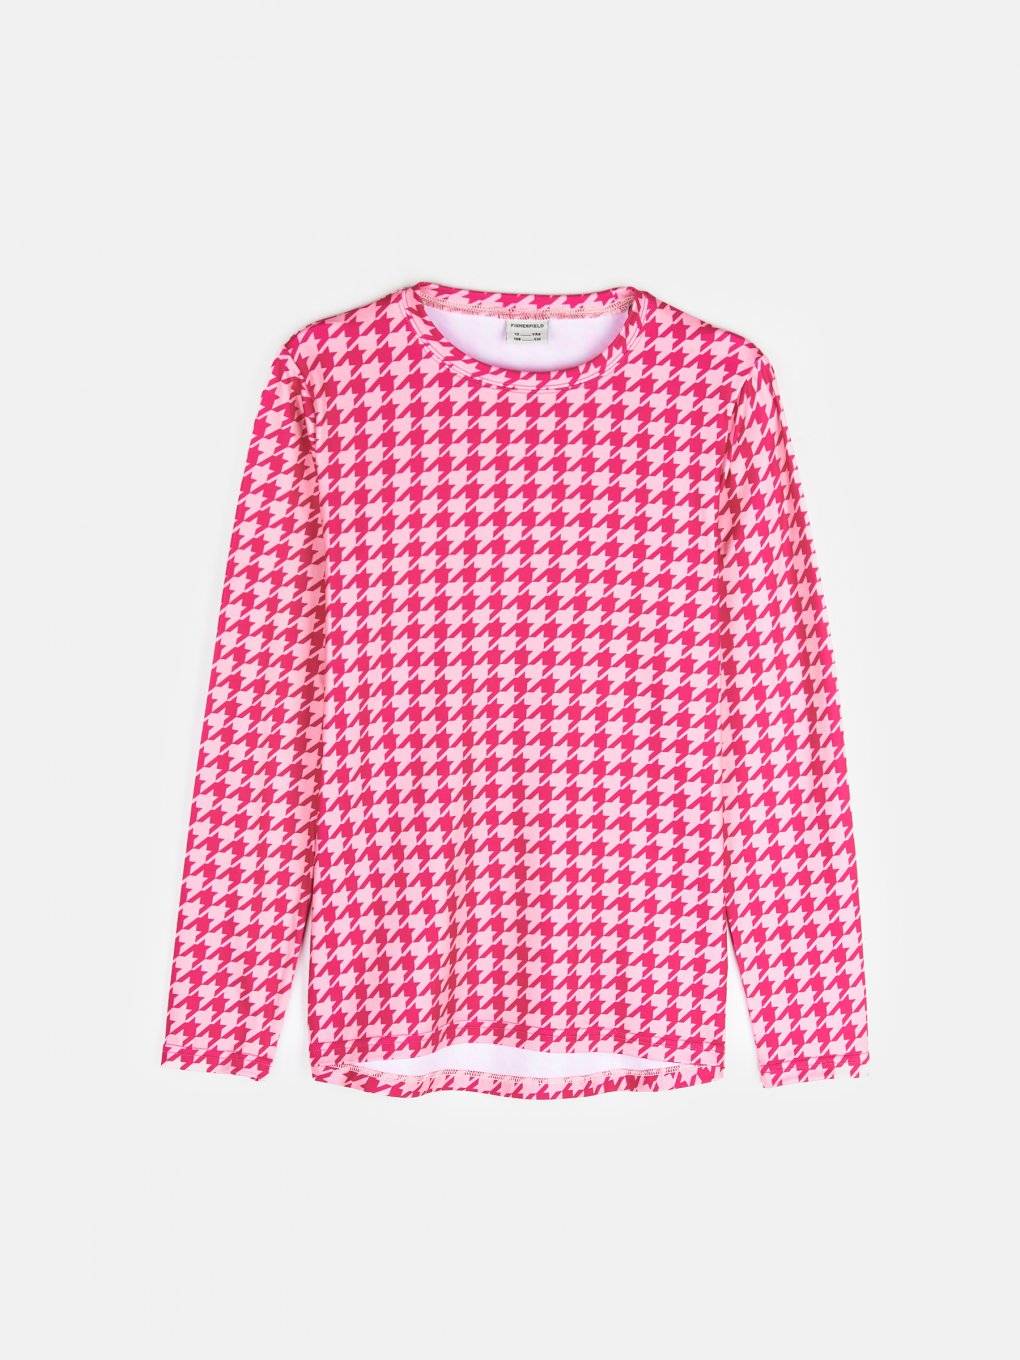 Houndstooth long sleeve t-shirt